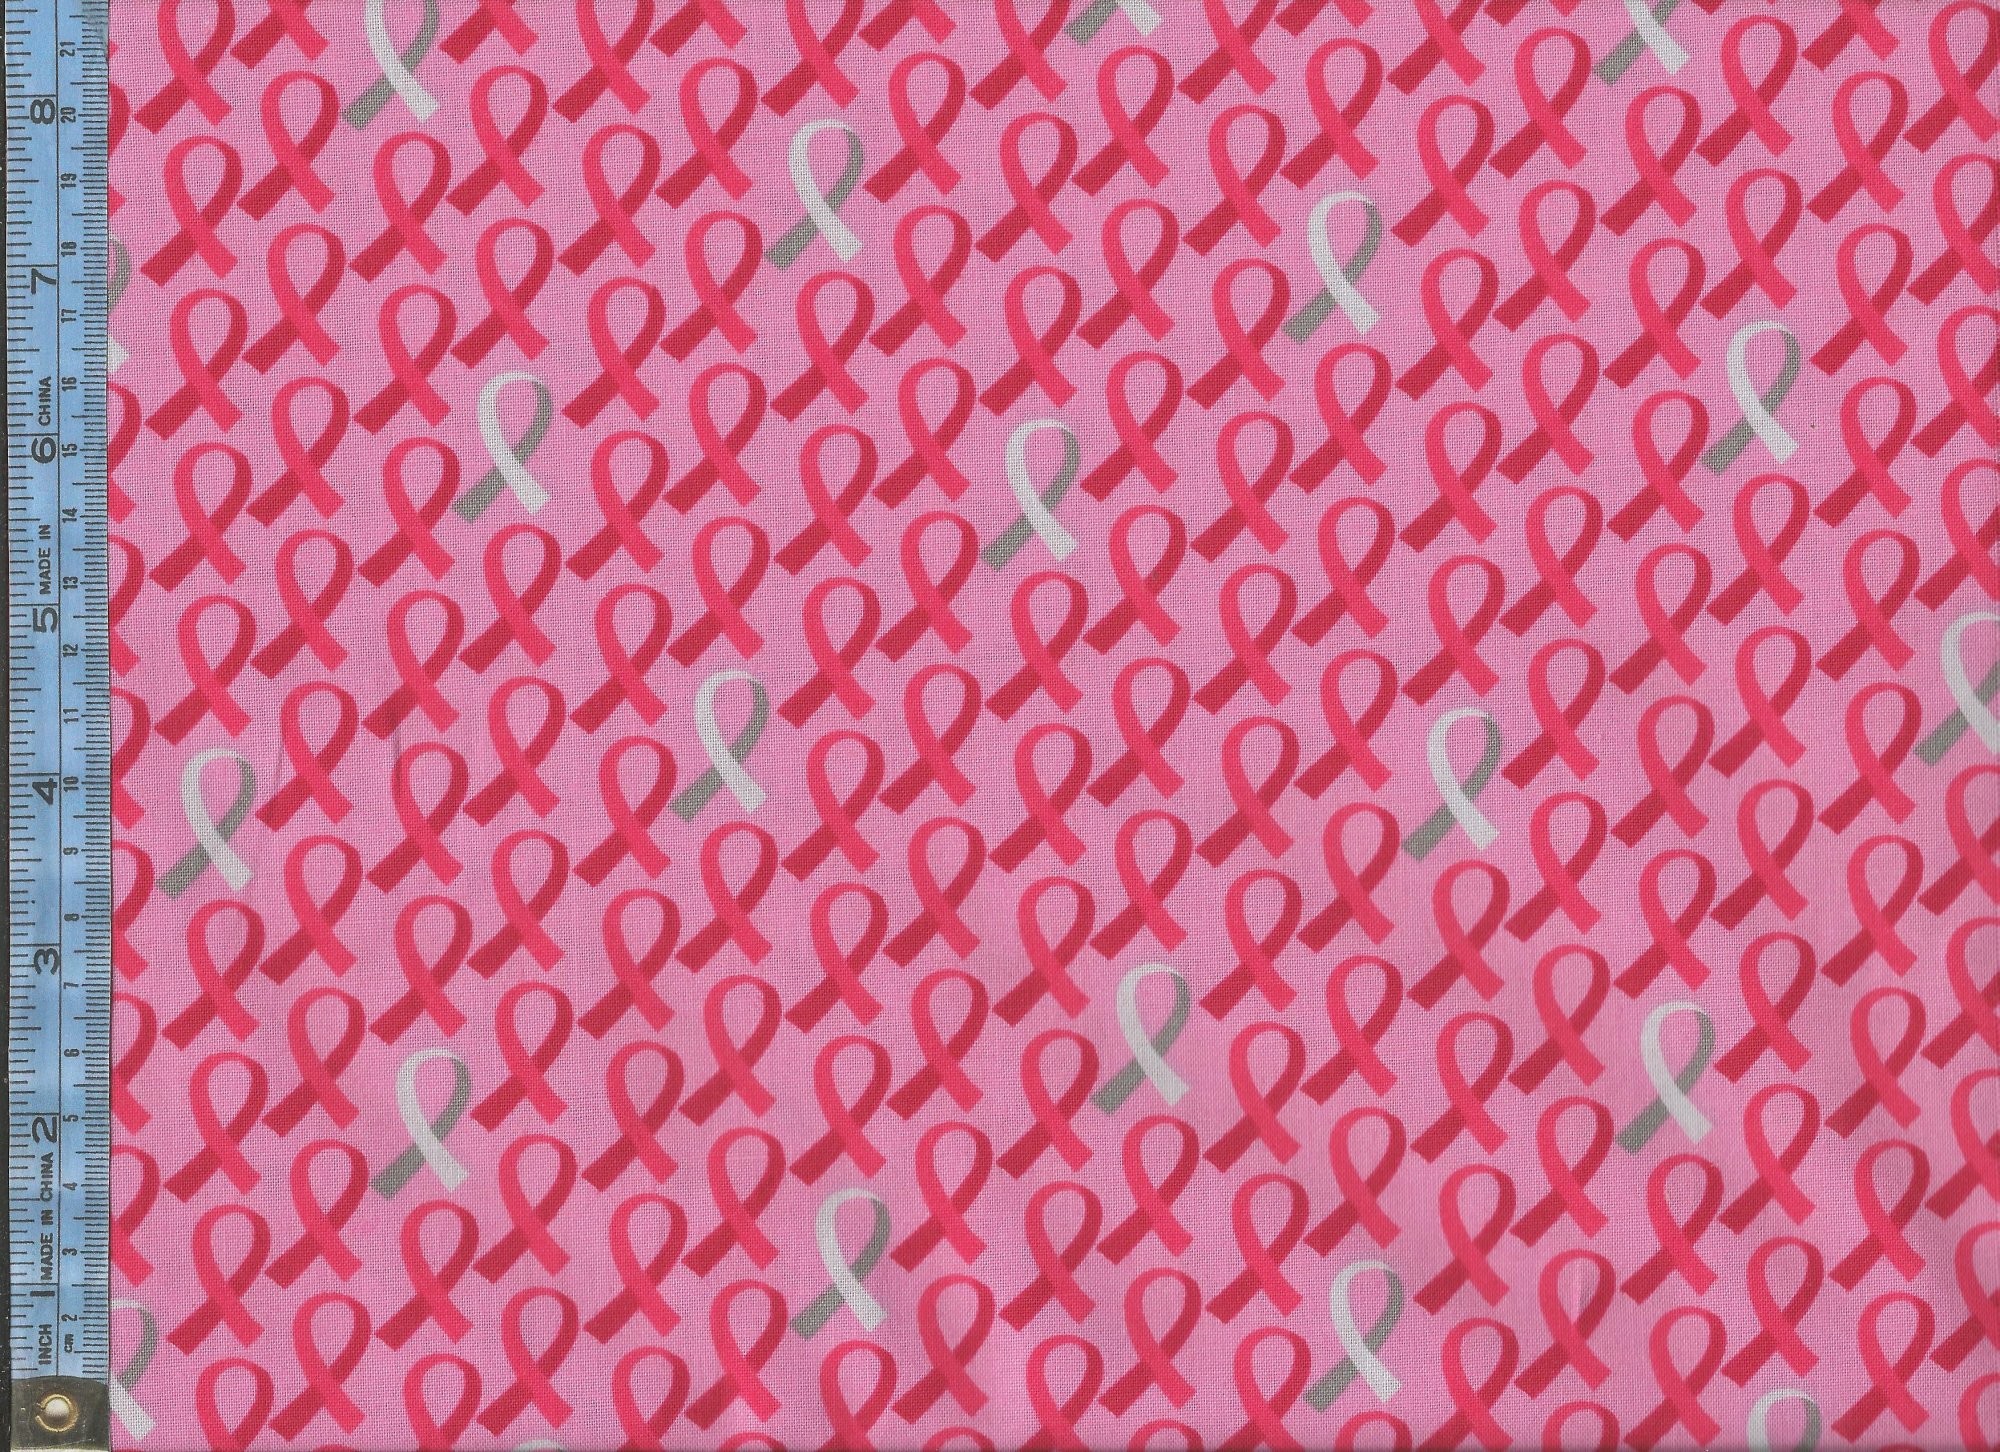 2000x1452 Anything is Possible - bright red and gray ribbons on bright pink background